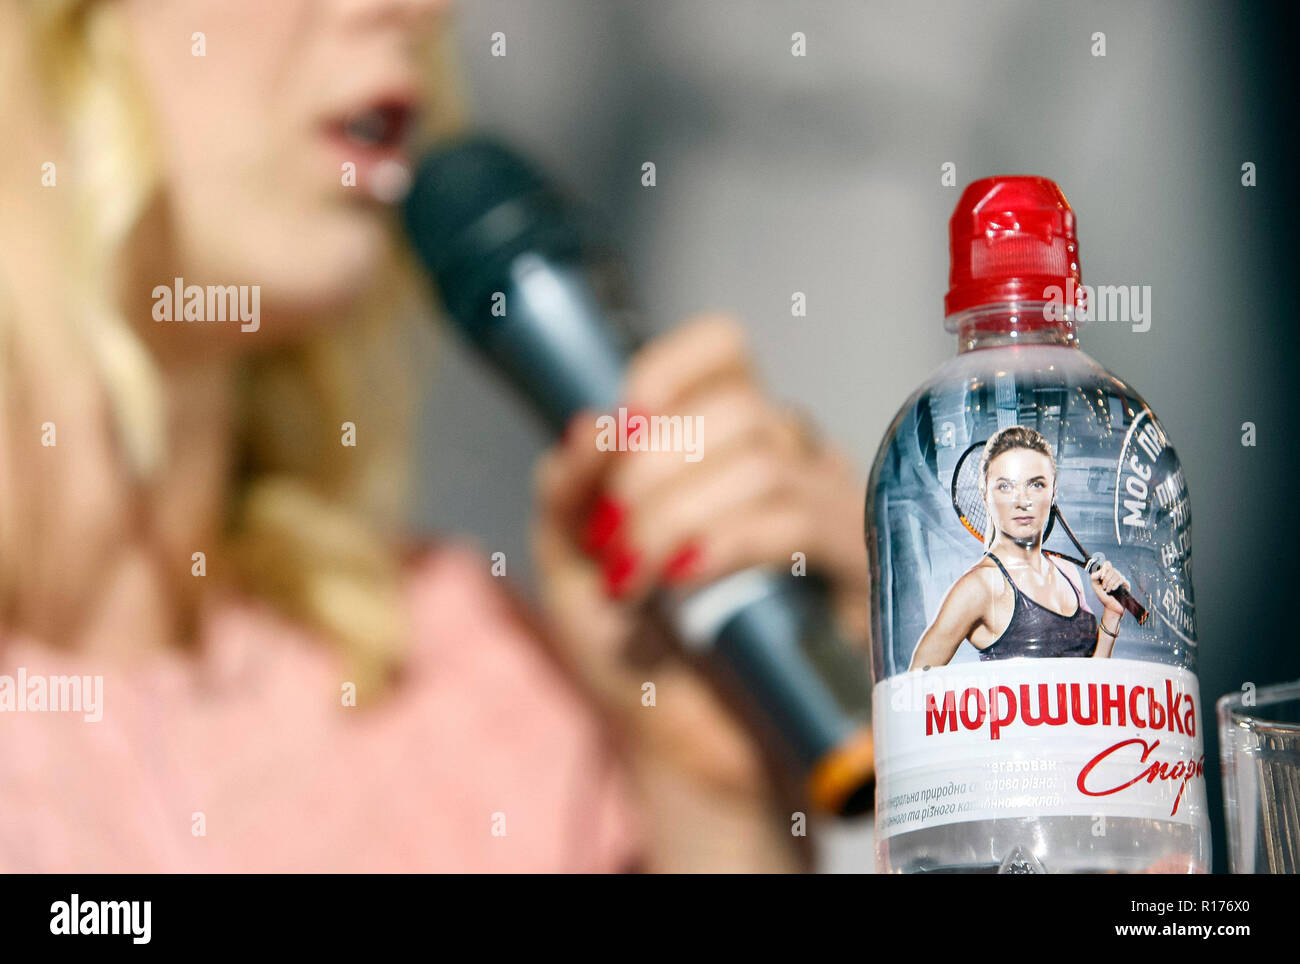 A bottle of mineral water with an image of Ukrainian tennis player Elina Svitolina seen on a table during an autograph session in Kiev. Elina Svitolina of Ukraine  winning against Sloane Stephens of the USA and register the biggest win of her career when she rallied for a 2-1 (3-6, 6-2, 6-2), during their singles final match of the BNP Paribas WTA Finals 2018 held in Singapore on 28 October 2018. Stock Photo